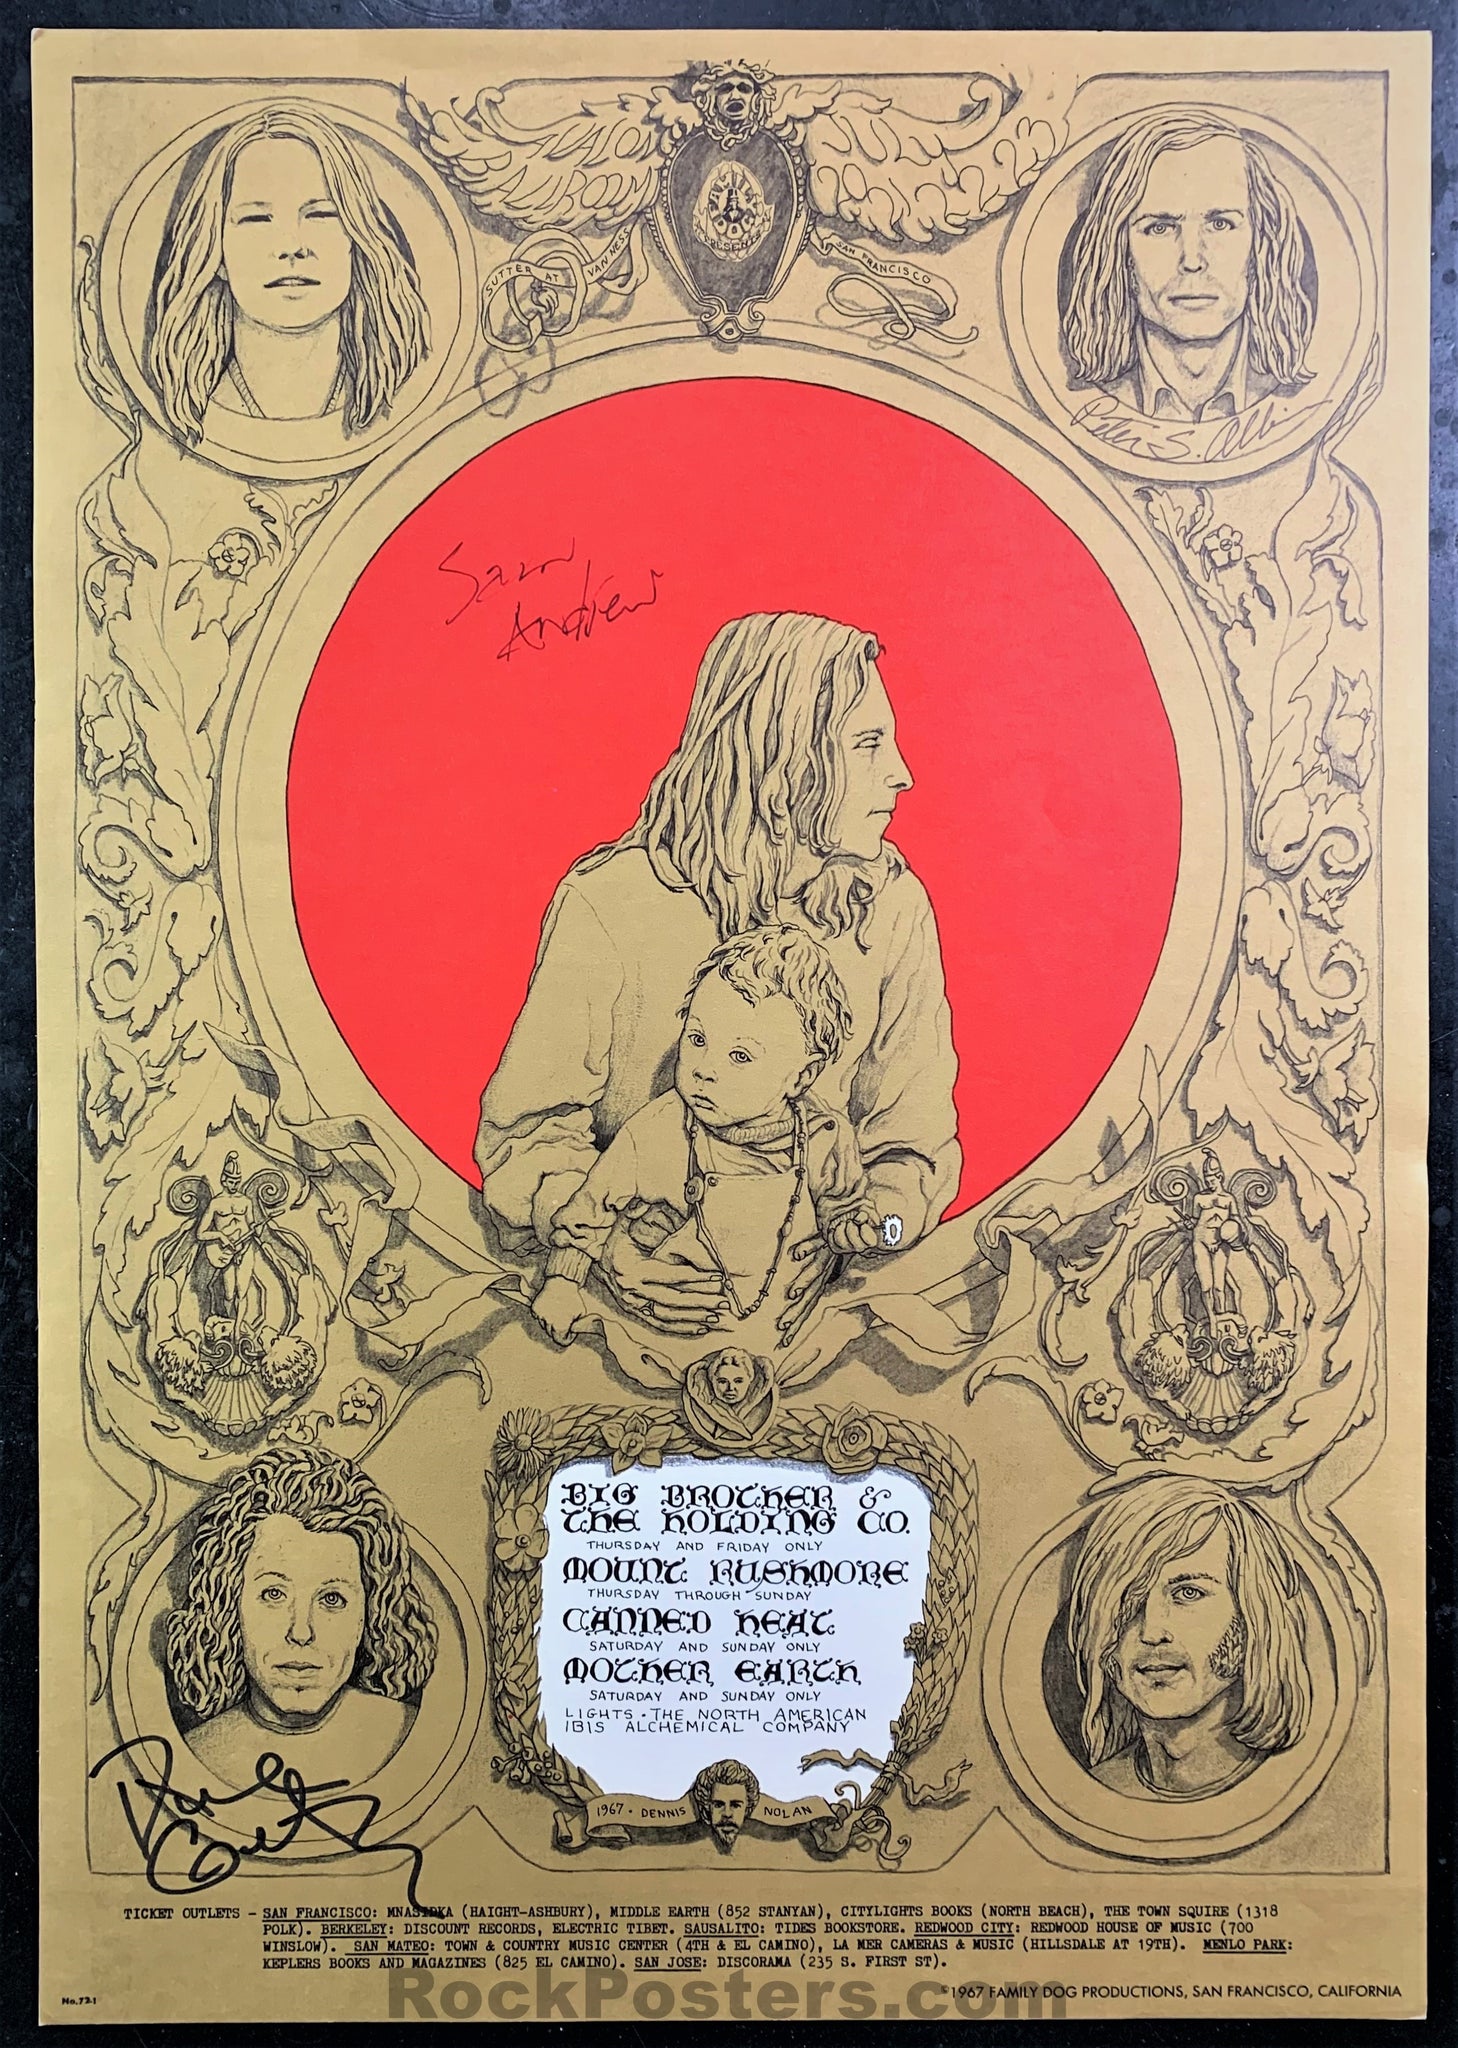 AUCTION - FD-72 - Big Brother - Band Members Signed - 1967 Poster - Avalon Ballroom - Excellent